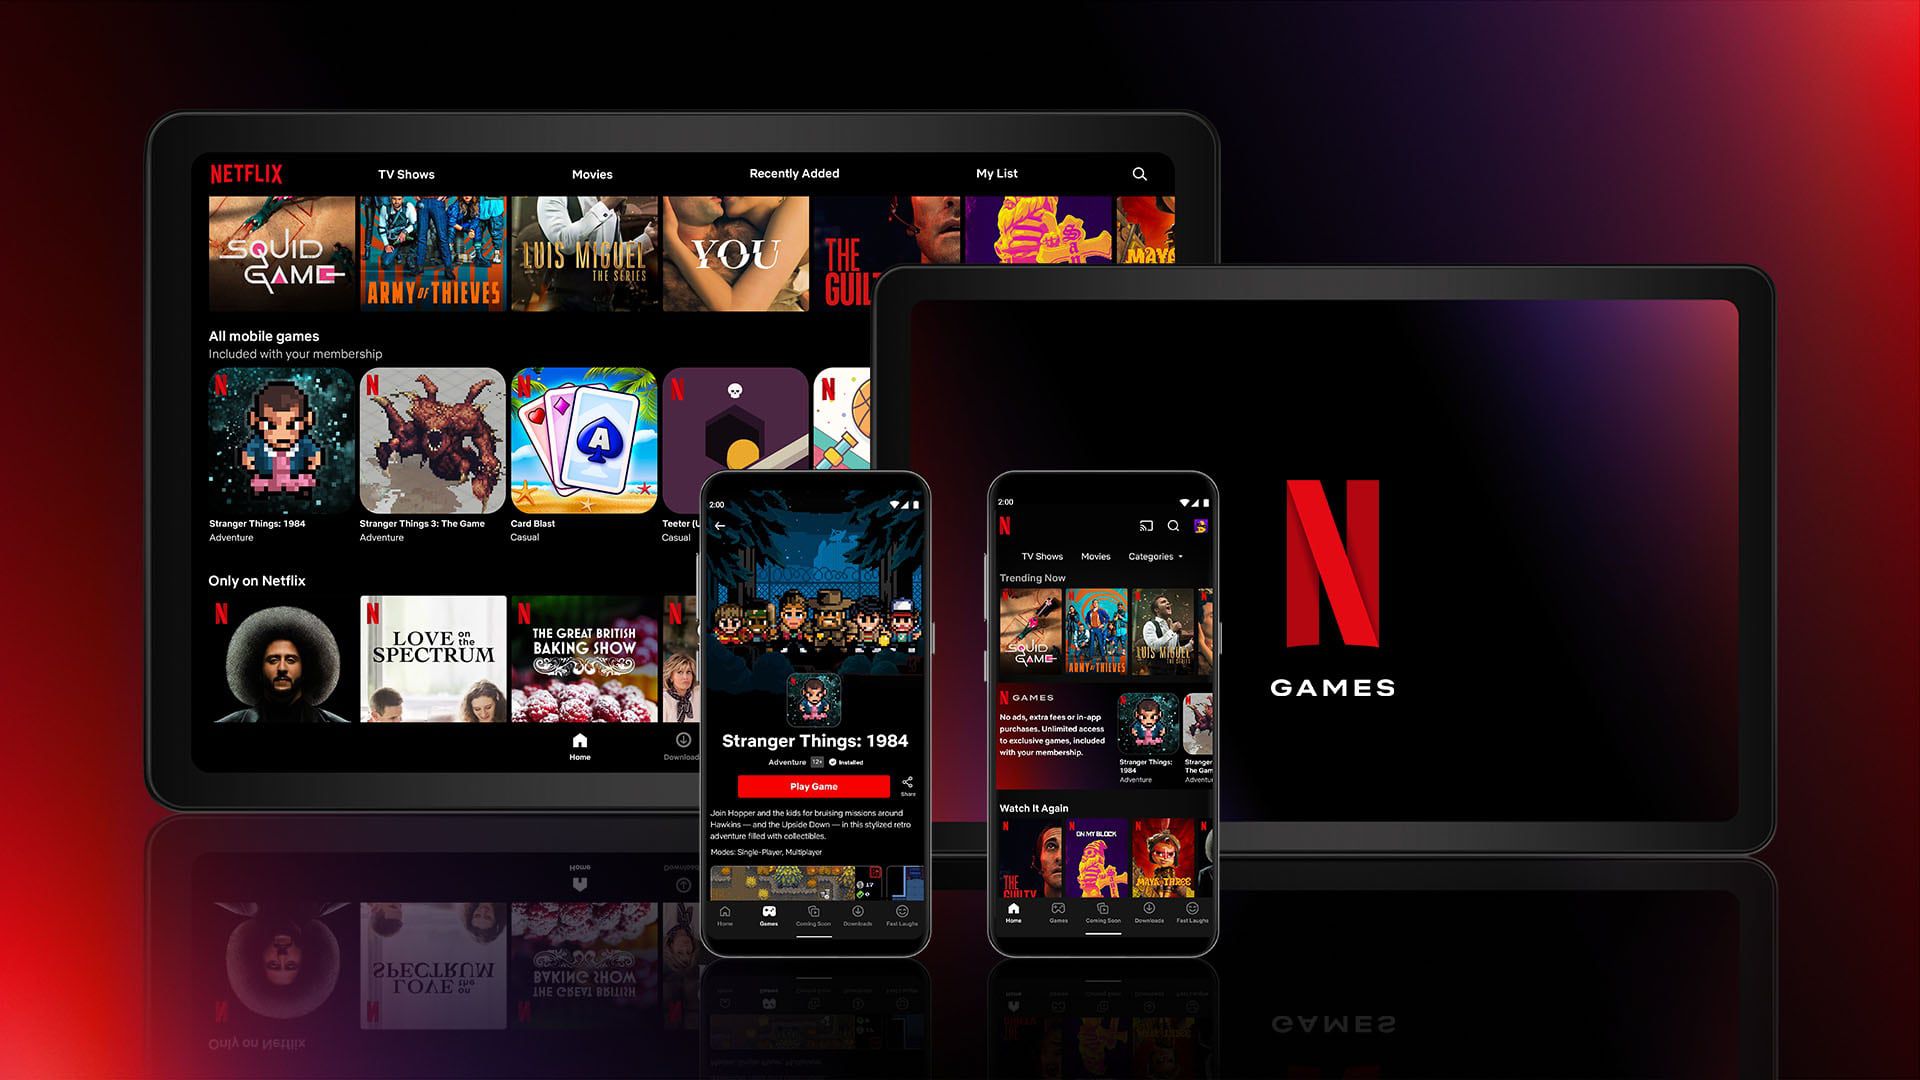 Netflix's TV Gaming Plan Allows iPhone to Be Used as Controller